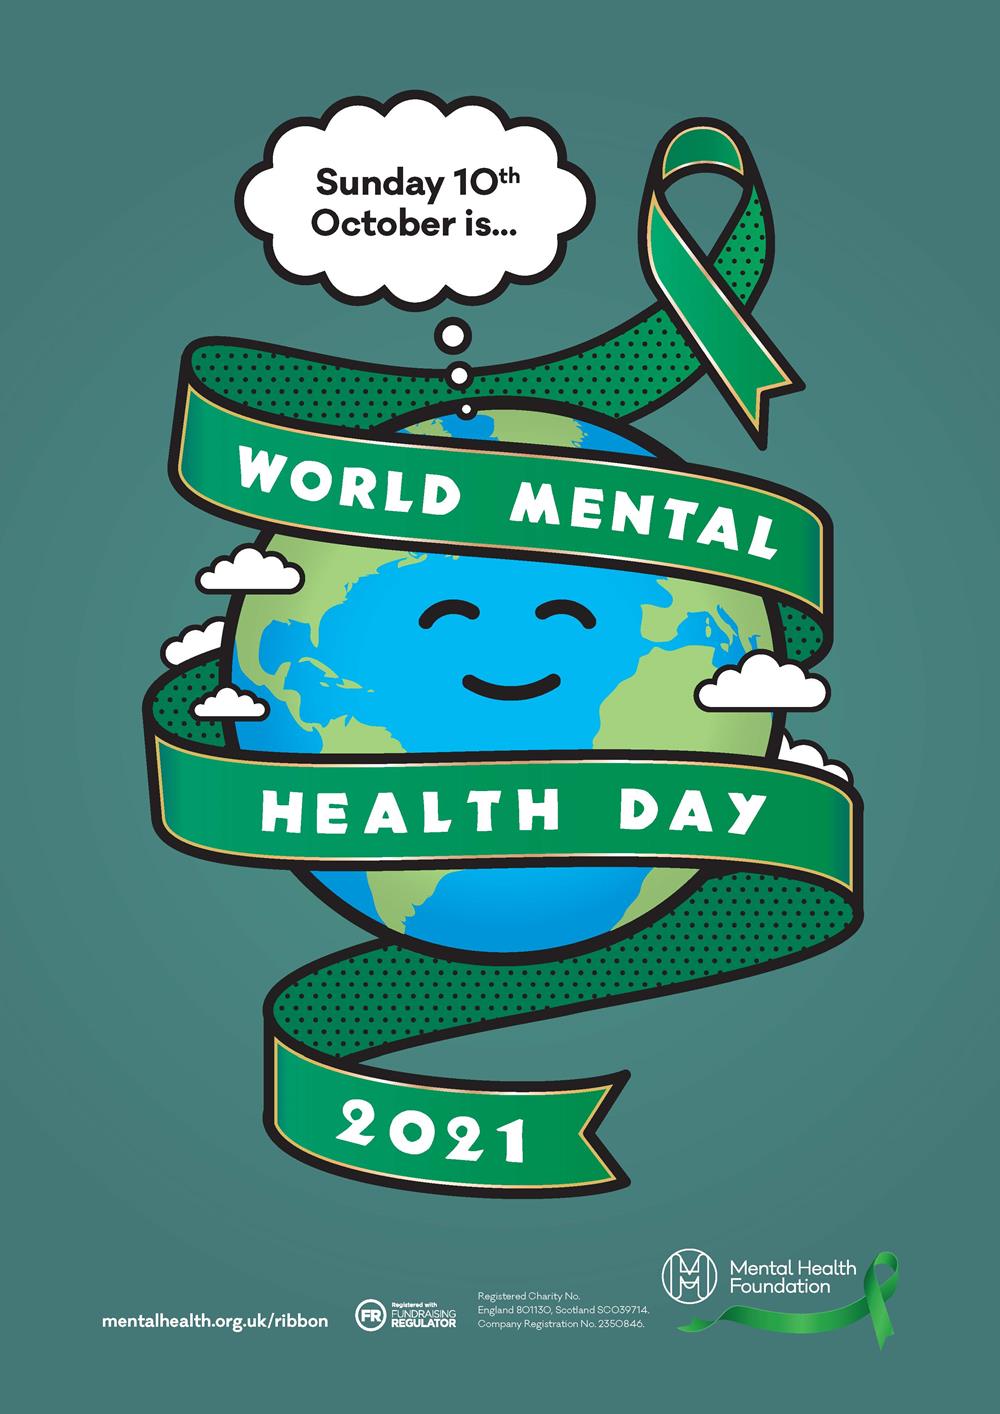 World Mental Health Day 2021 - October 10th